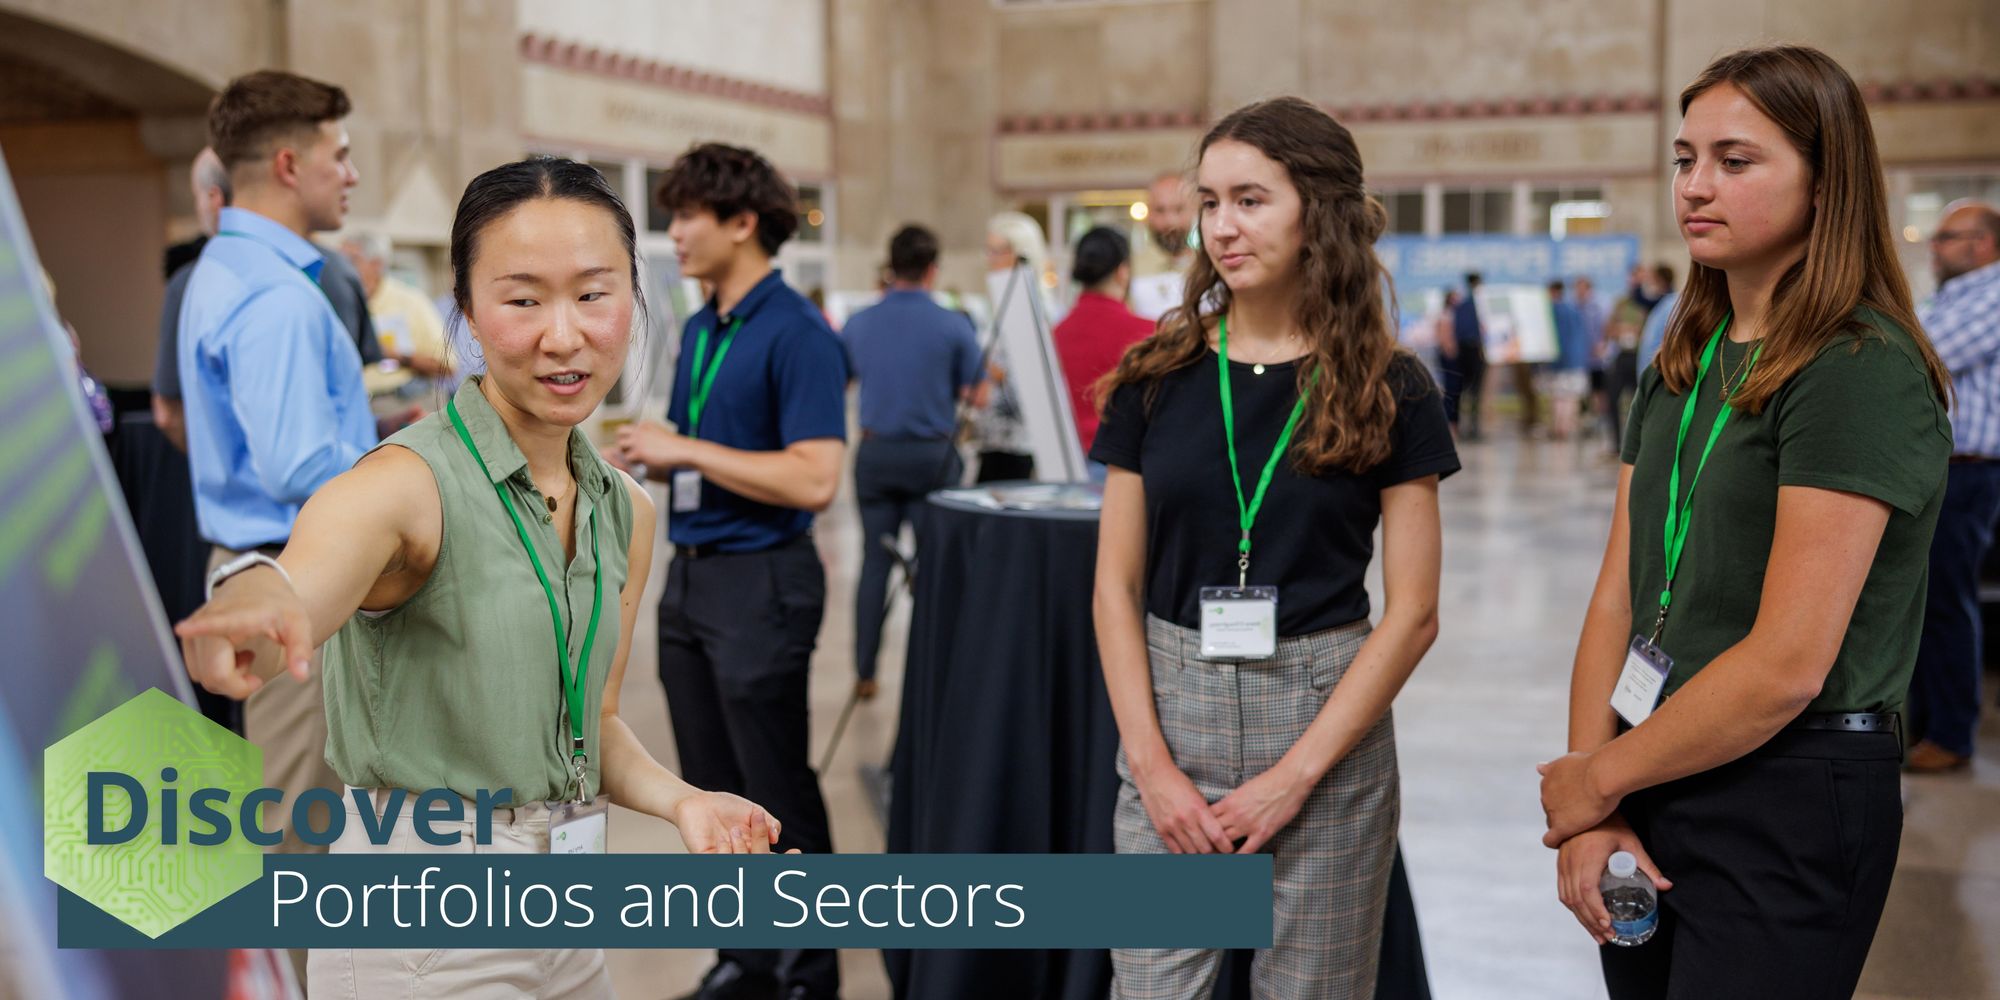 Discover enFocus Portfolios and Sectors: Cultivating Skills through Collaborative Partnerships